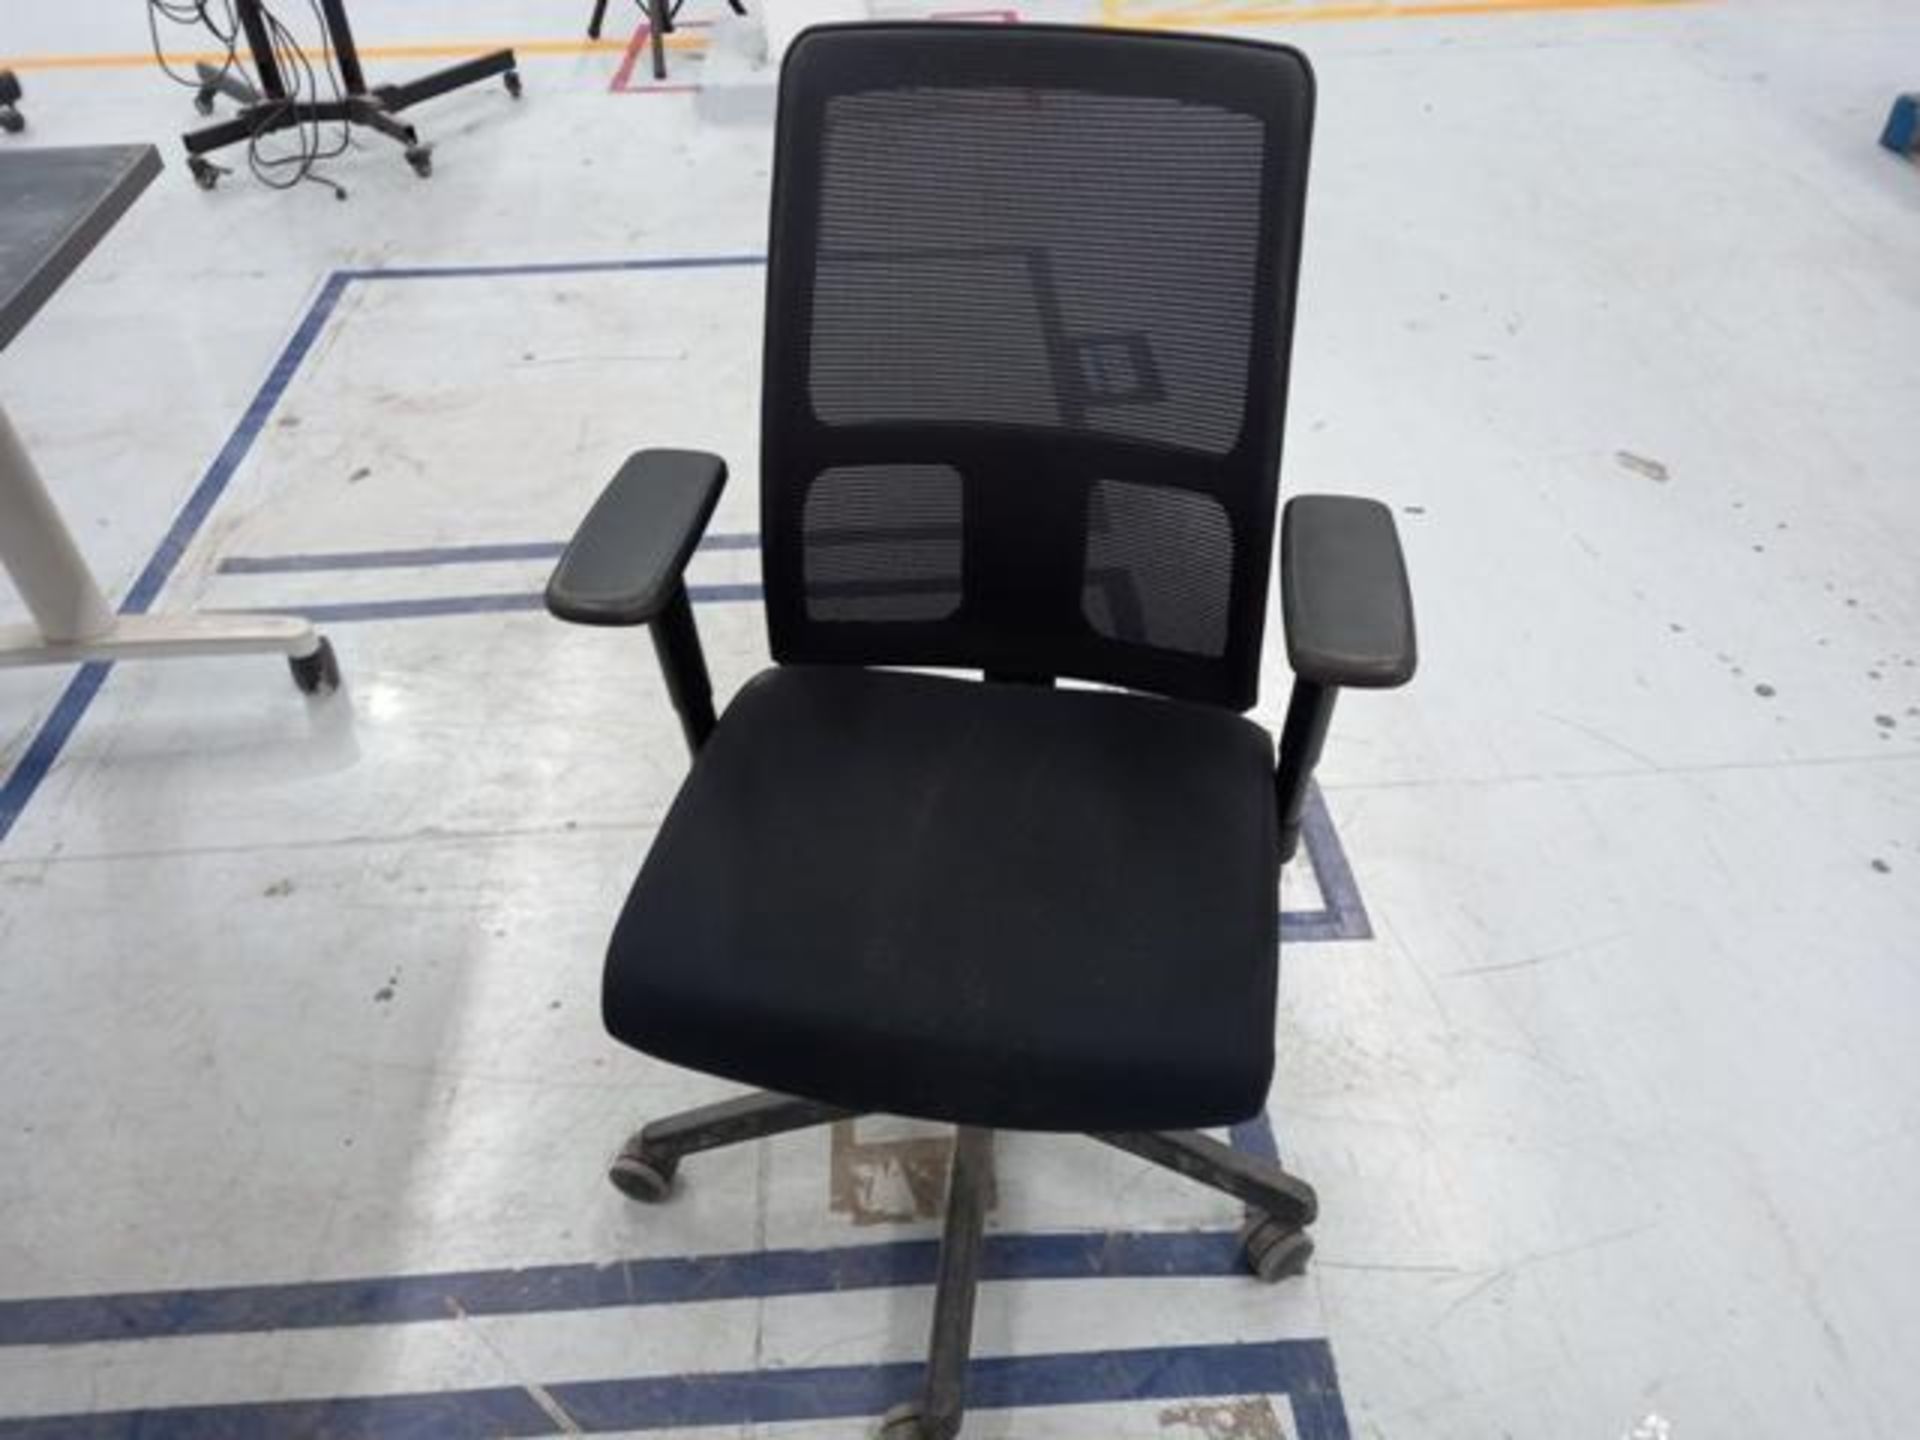 LOT: (66) Of Furniture and Computing Equipment Consisting of: Computers, Printers, Desks, Chairs, Dr - Image 5 of 38